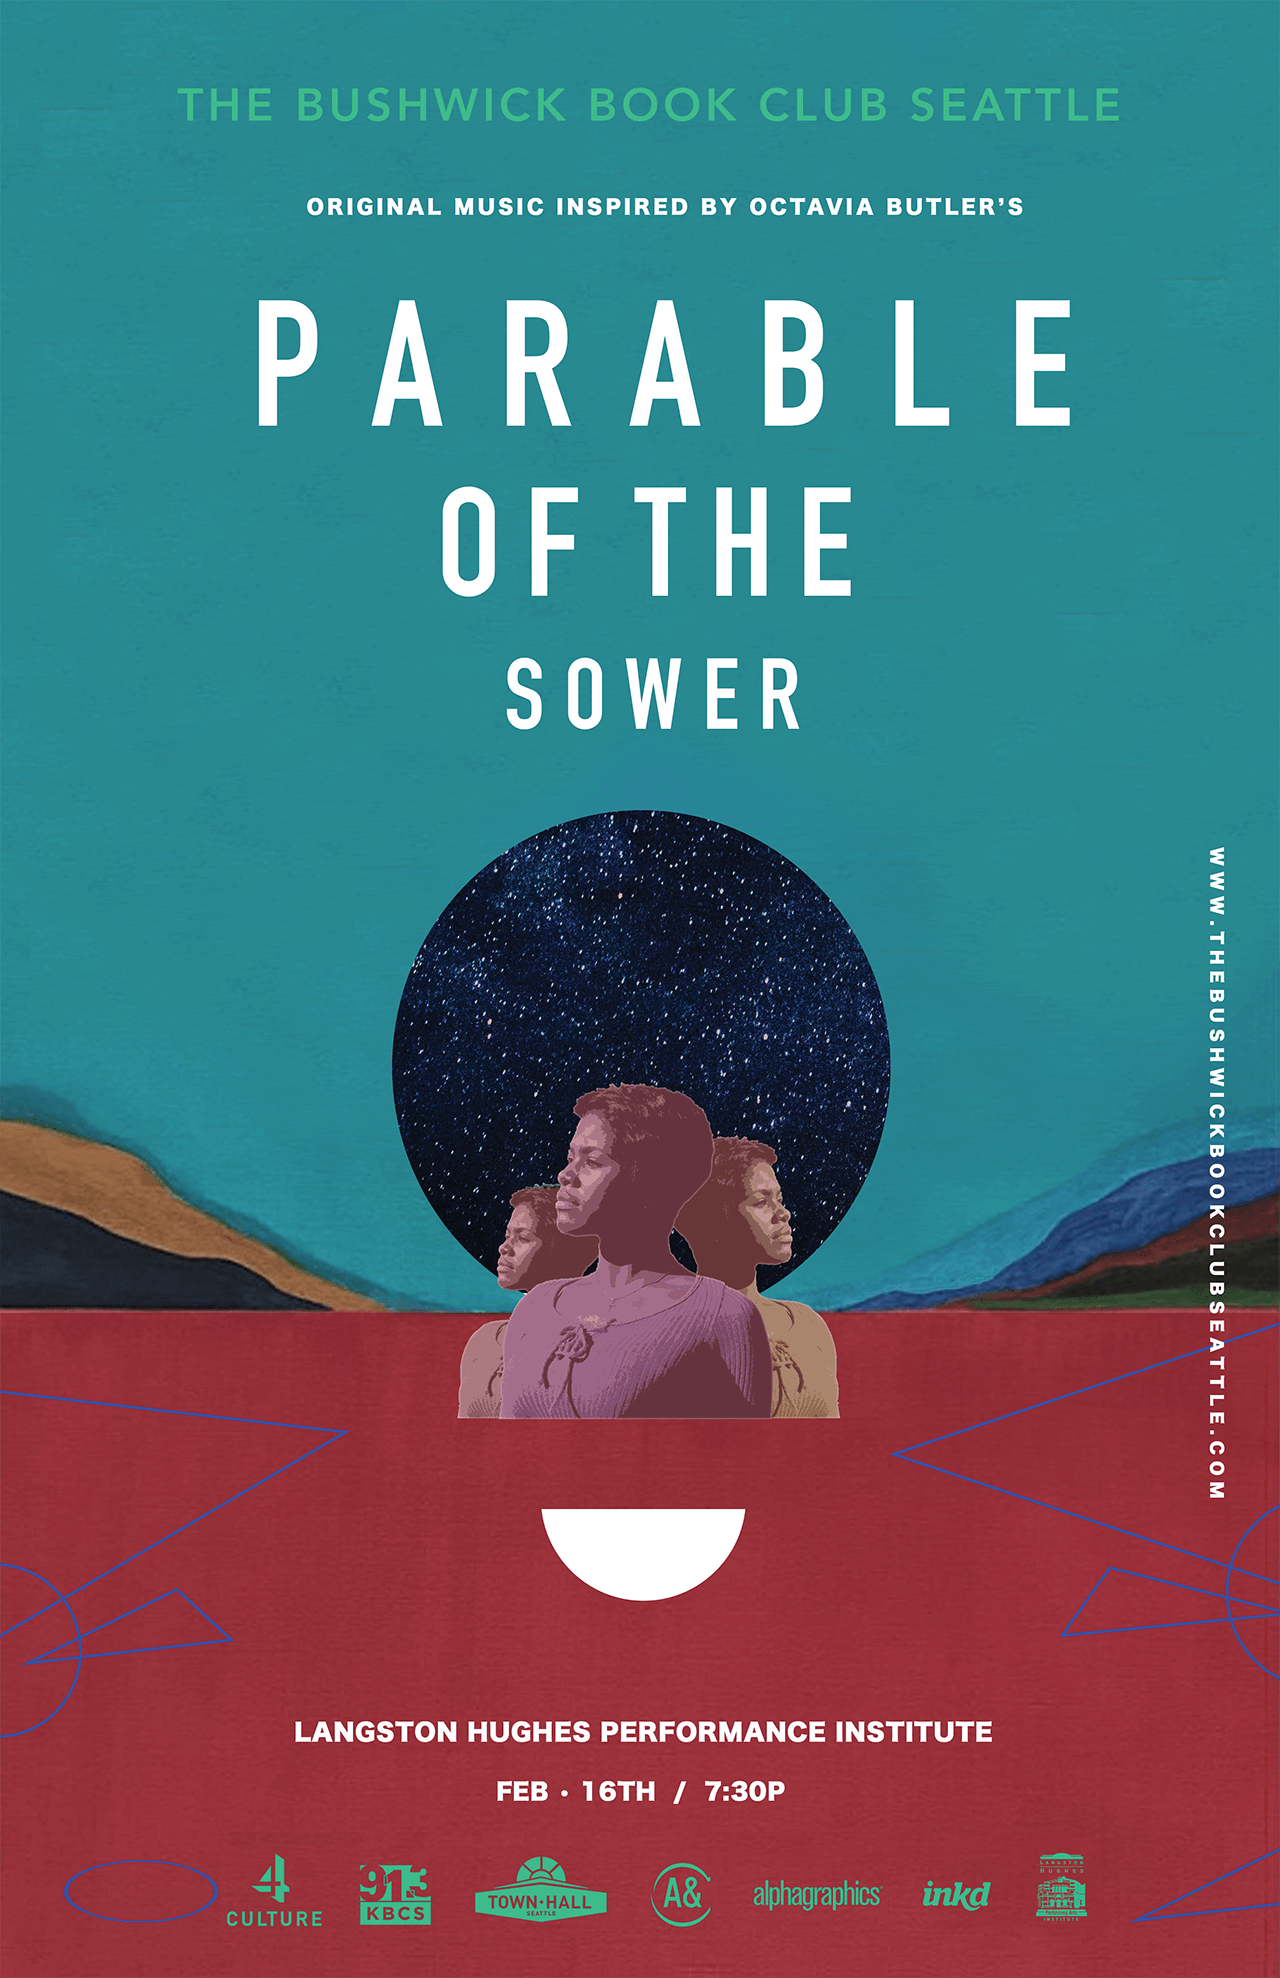 parable of the sower octavia butler